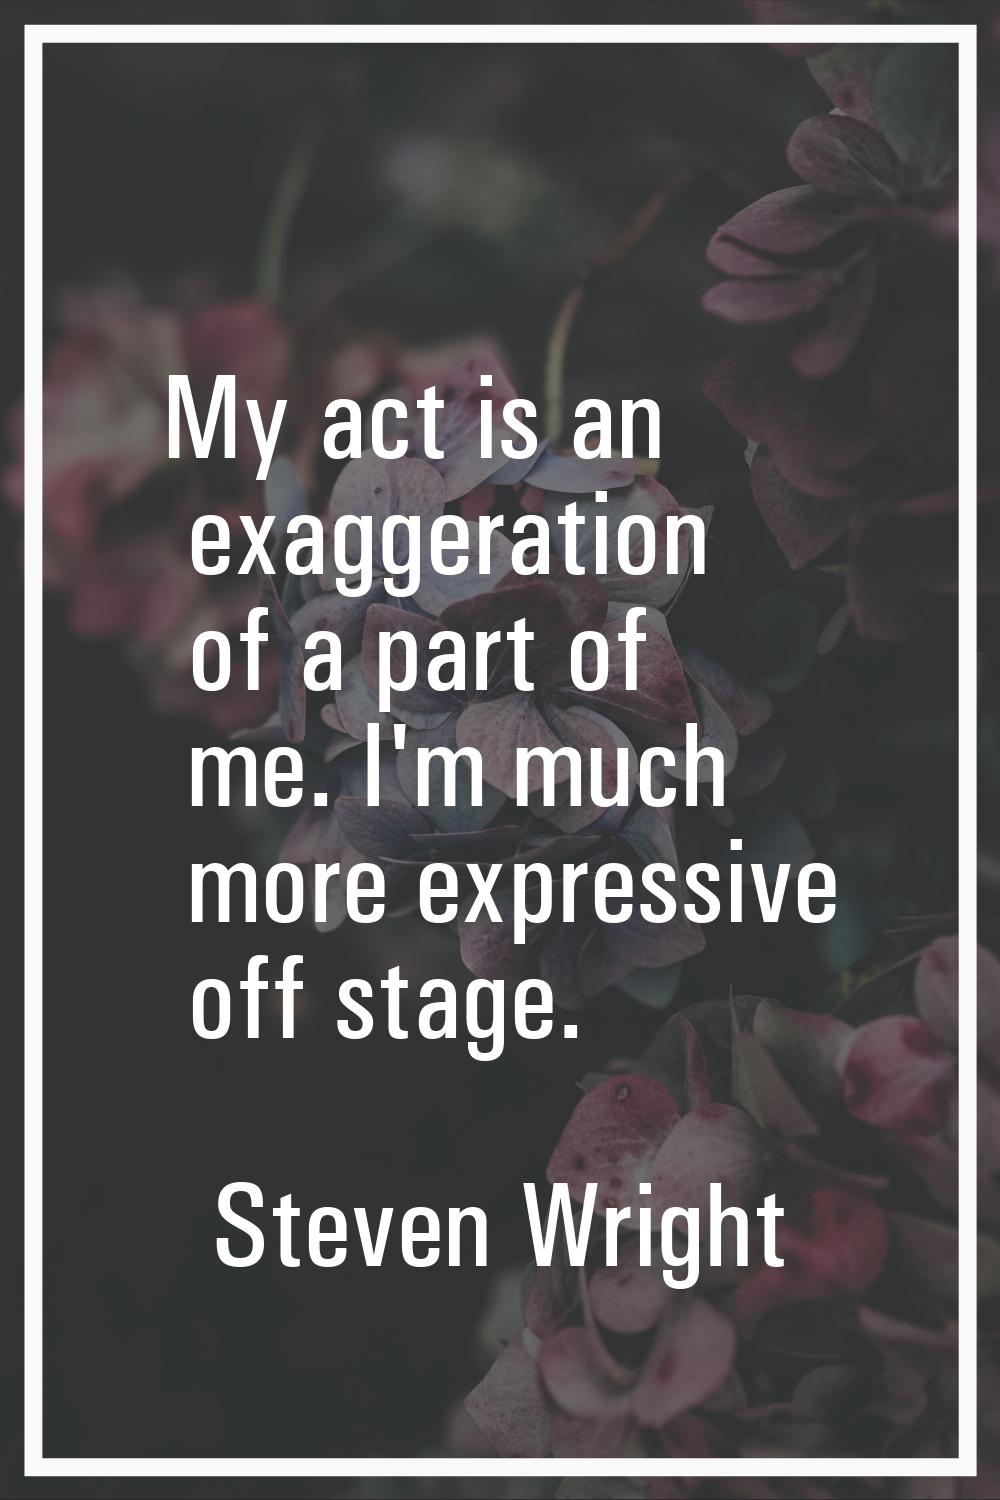 My act is an exaggeration of a part of me. I'm much more expressive off stage.